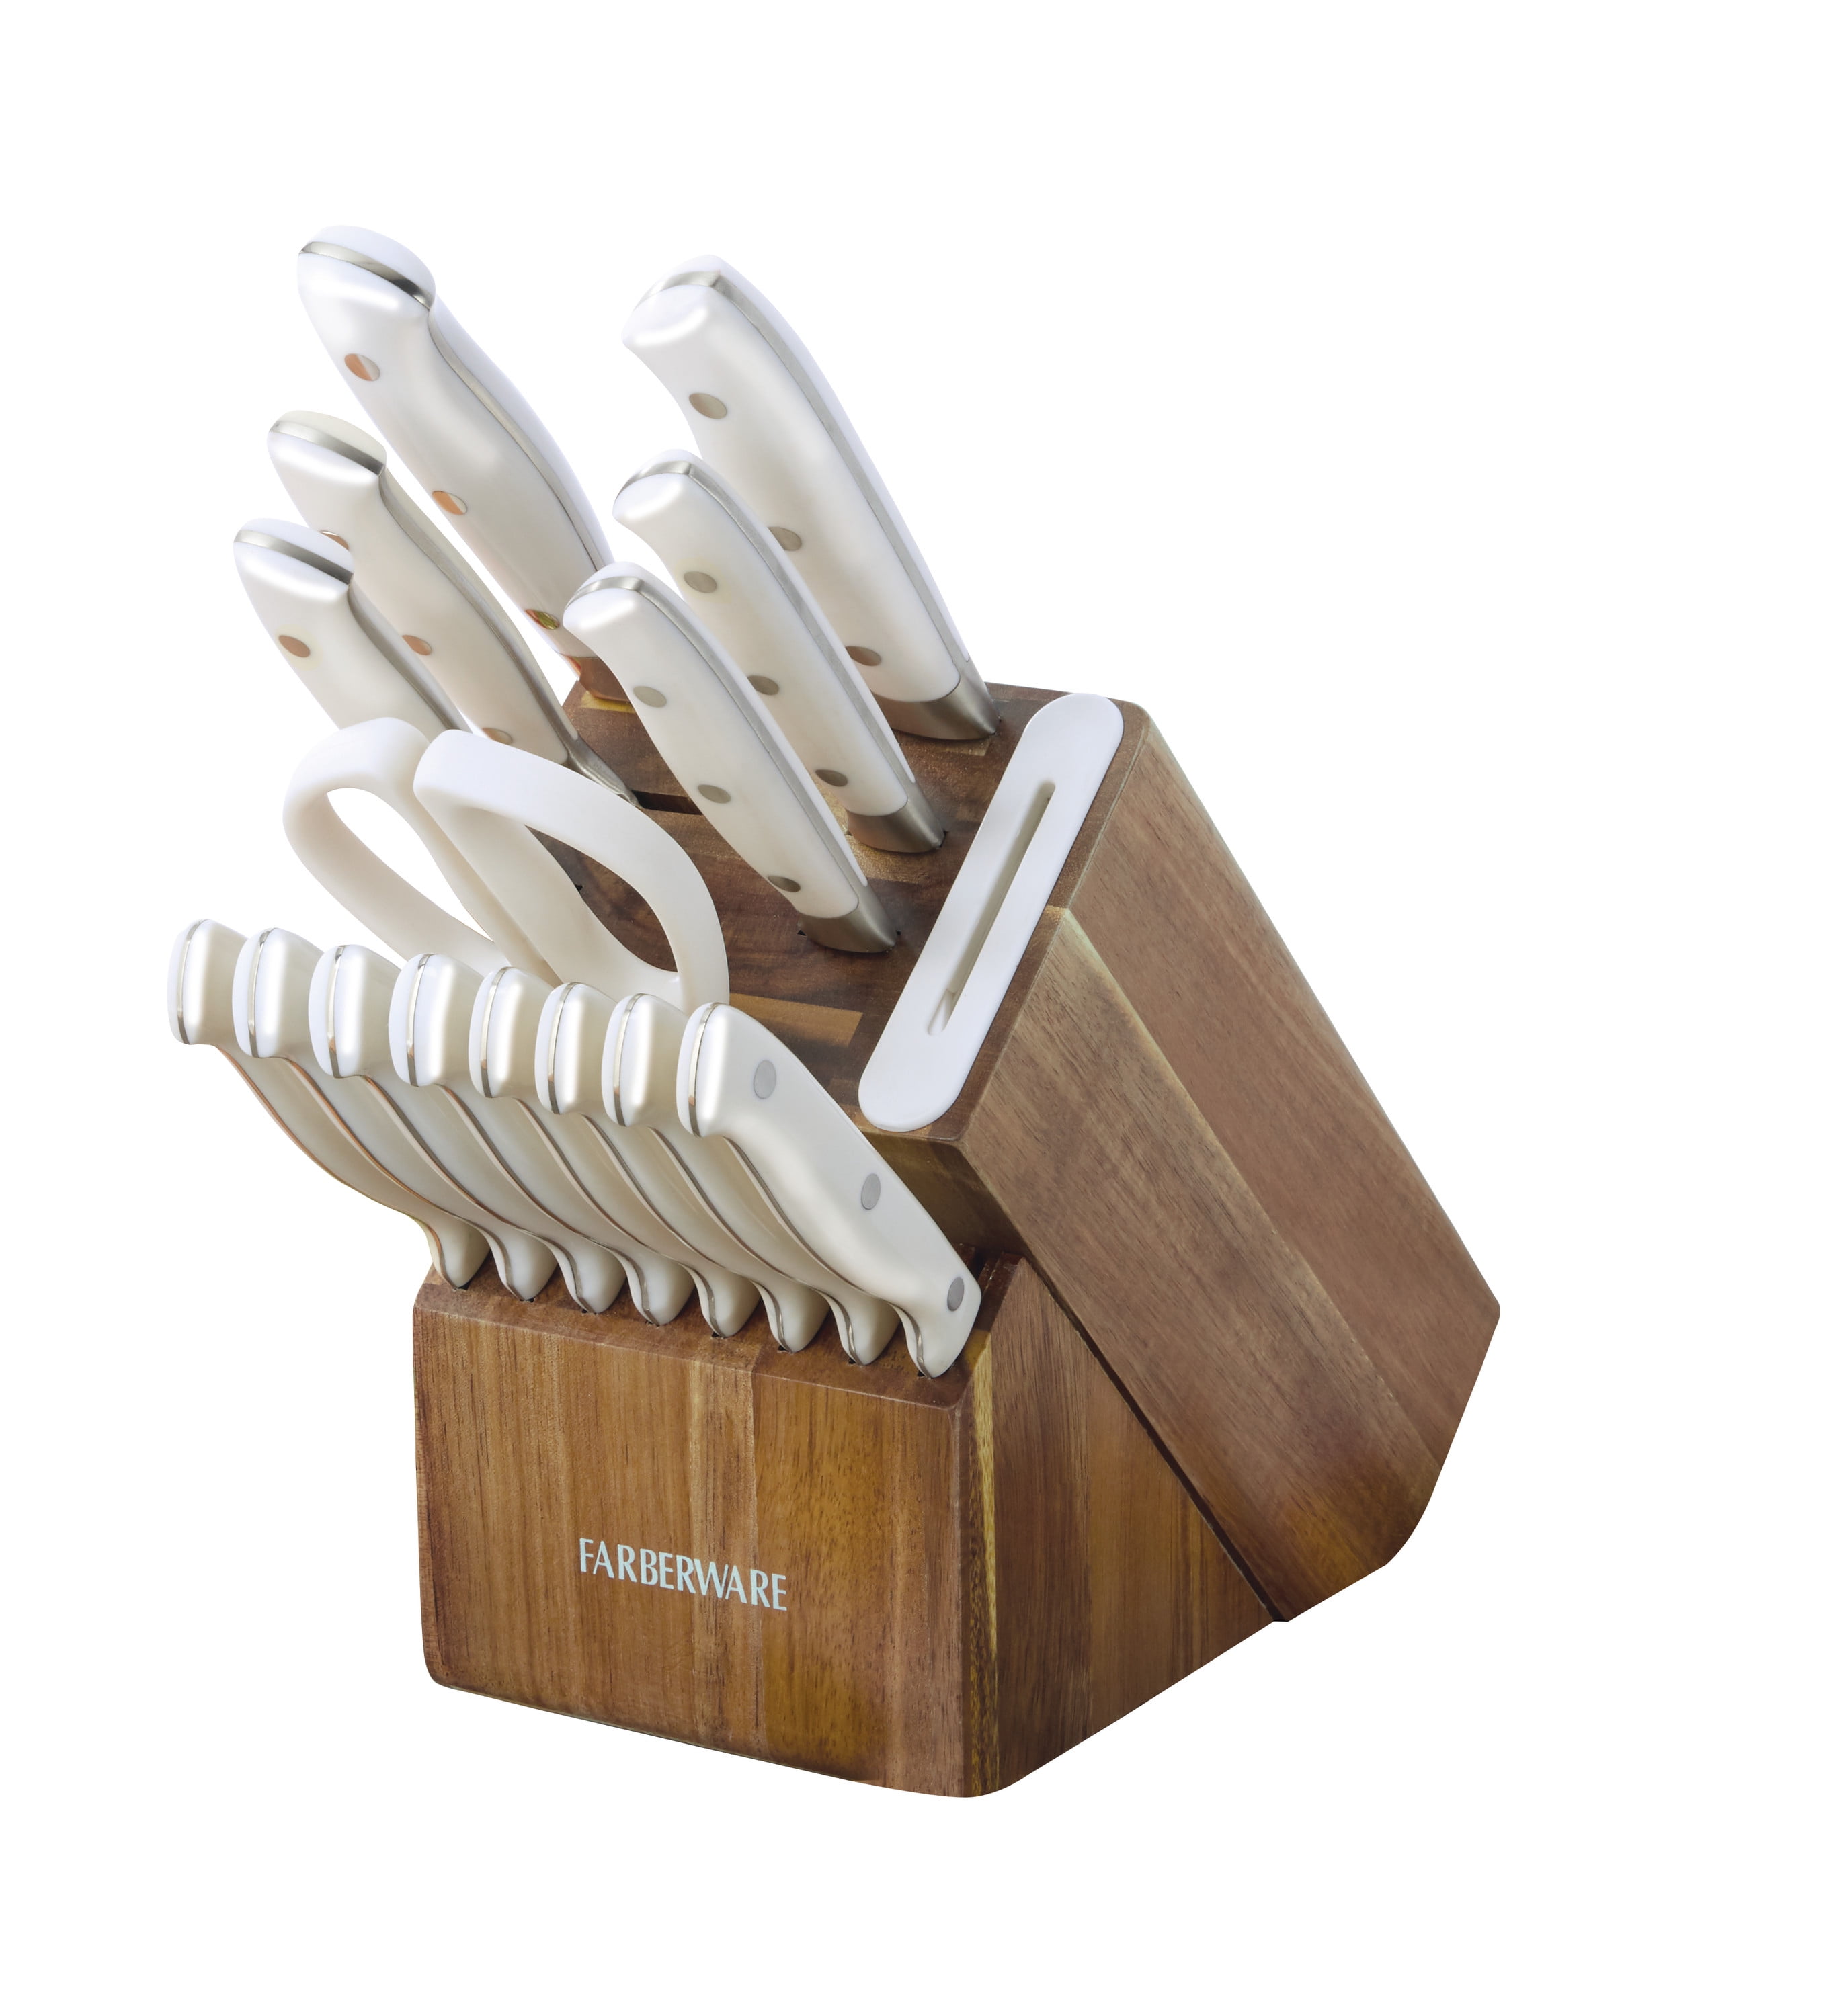  Sabatier Self-Sharpening 12-piece Forged Triple Rivet Knife  Block Set with Edgekeeper Technology, High-Carbon Stainless Steel Kitchen  Knives, Razor-Sharp Knife Set with Wood Block, Black: Home & Kitchen